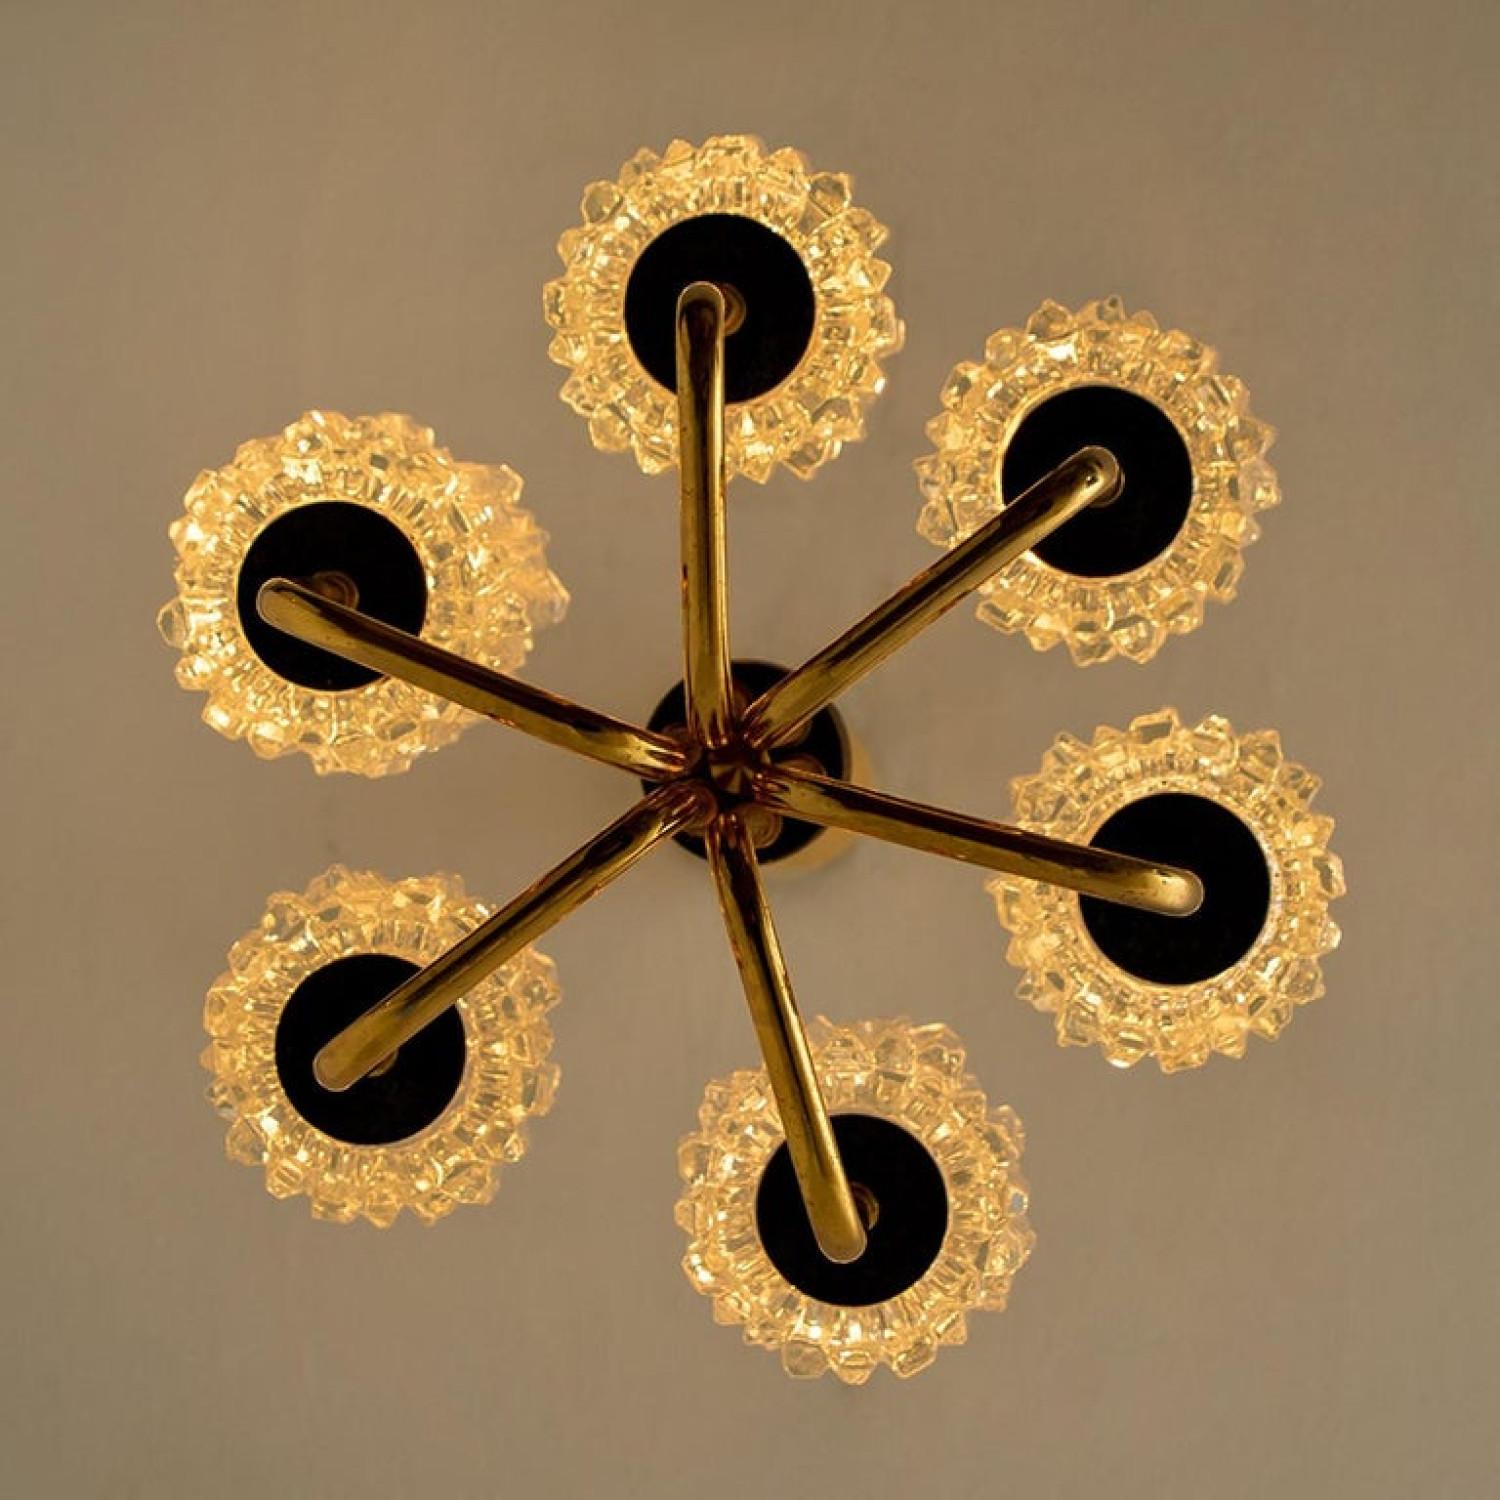 Midcentury Brass and Blown Glass Chandelier by Hillebrand, 1960s For Sale 7